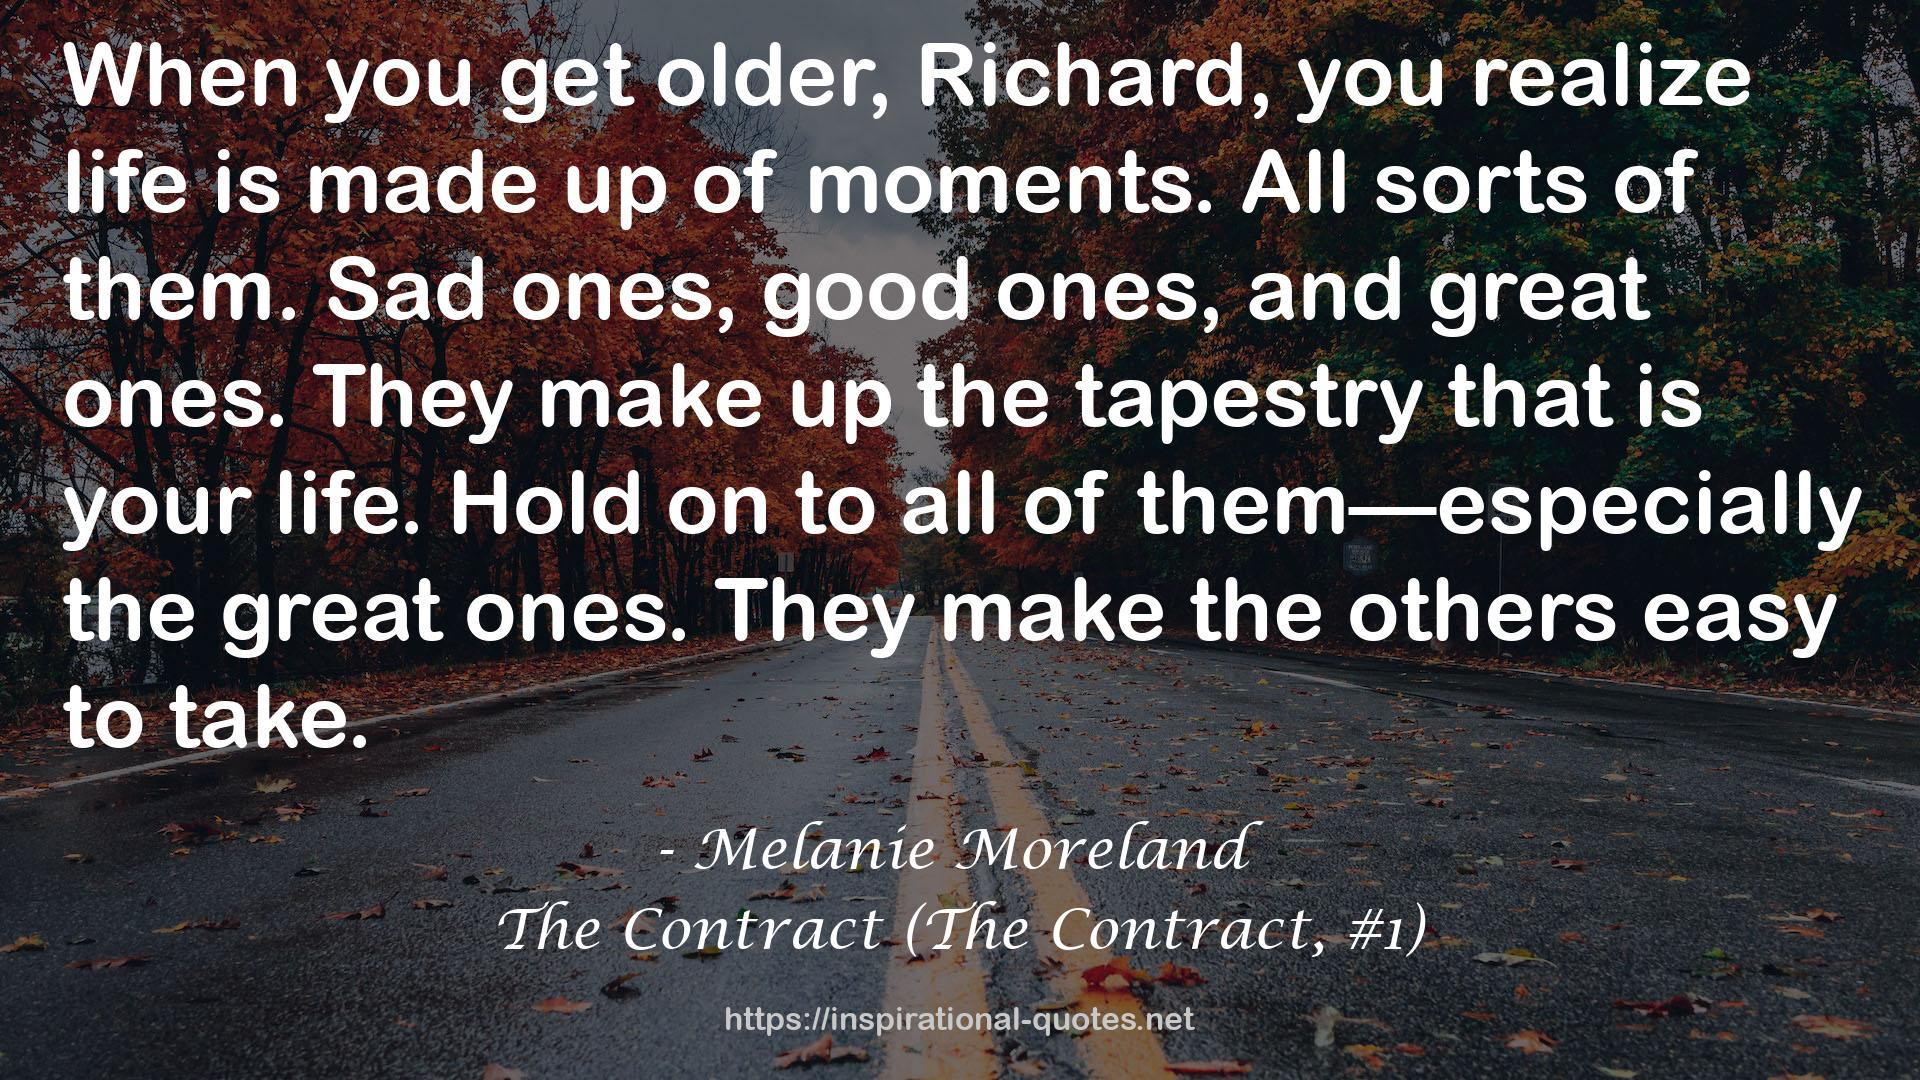 The Contract (The Contract, #1) QUOTES